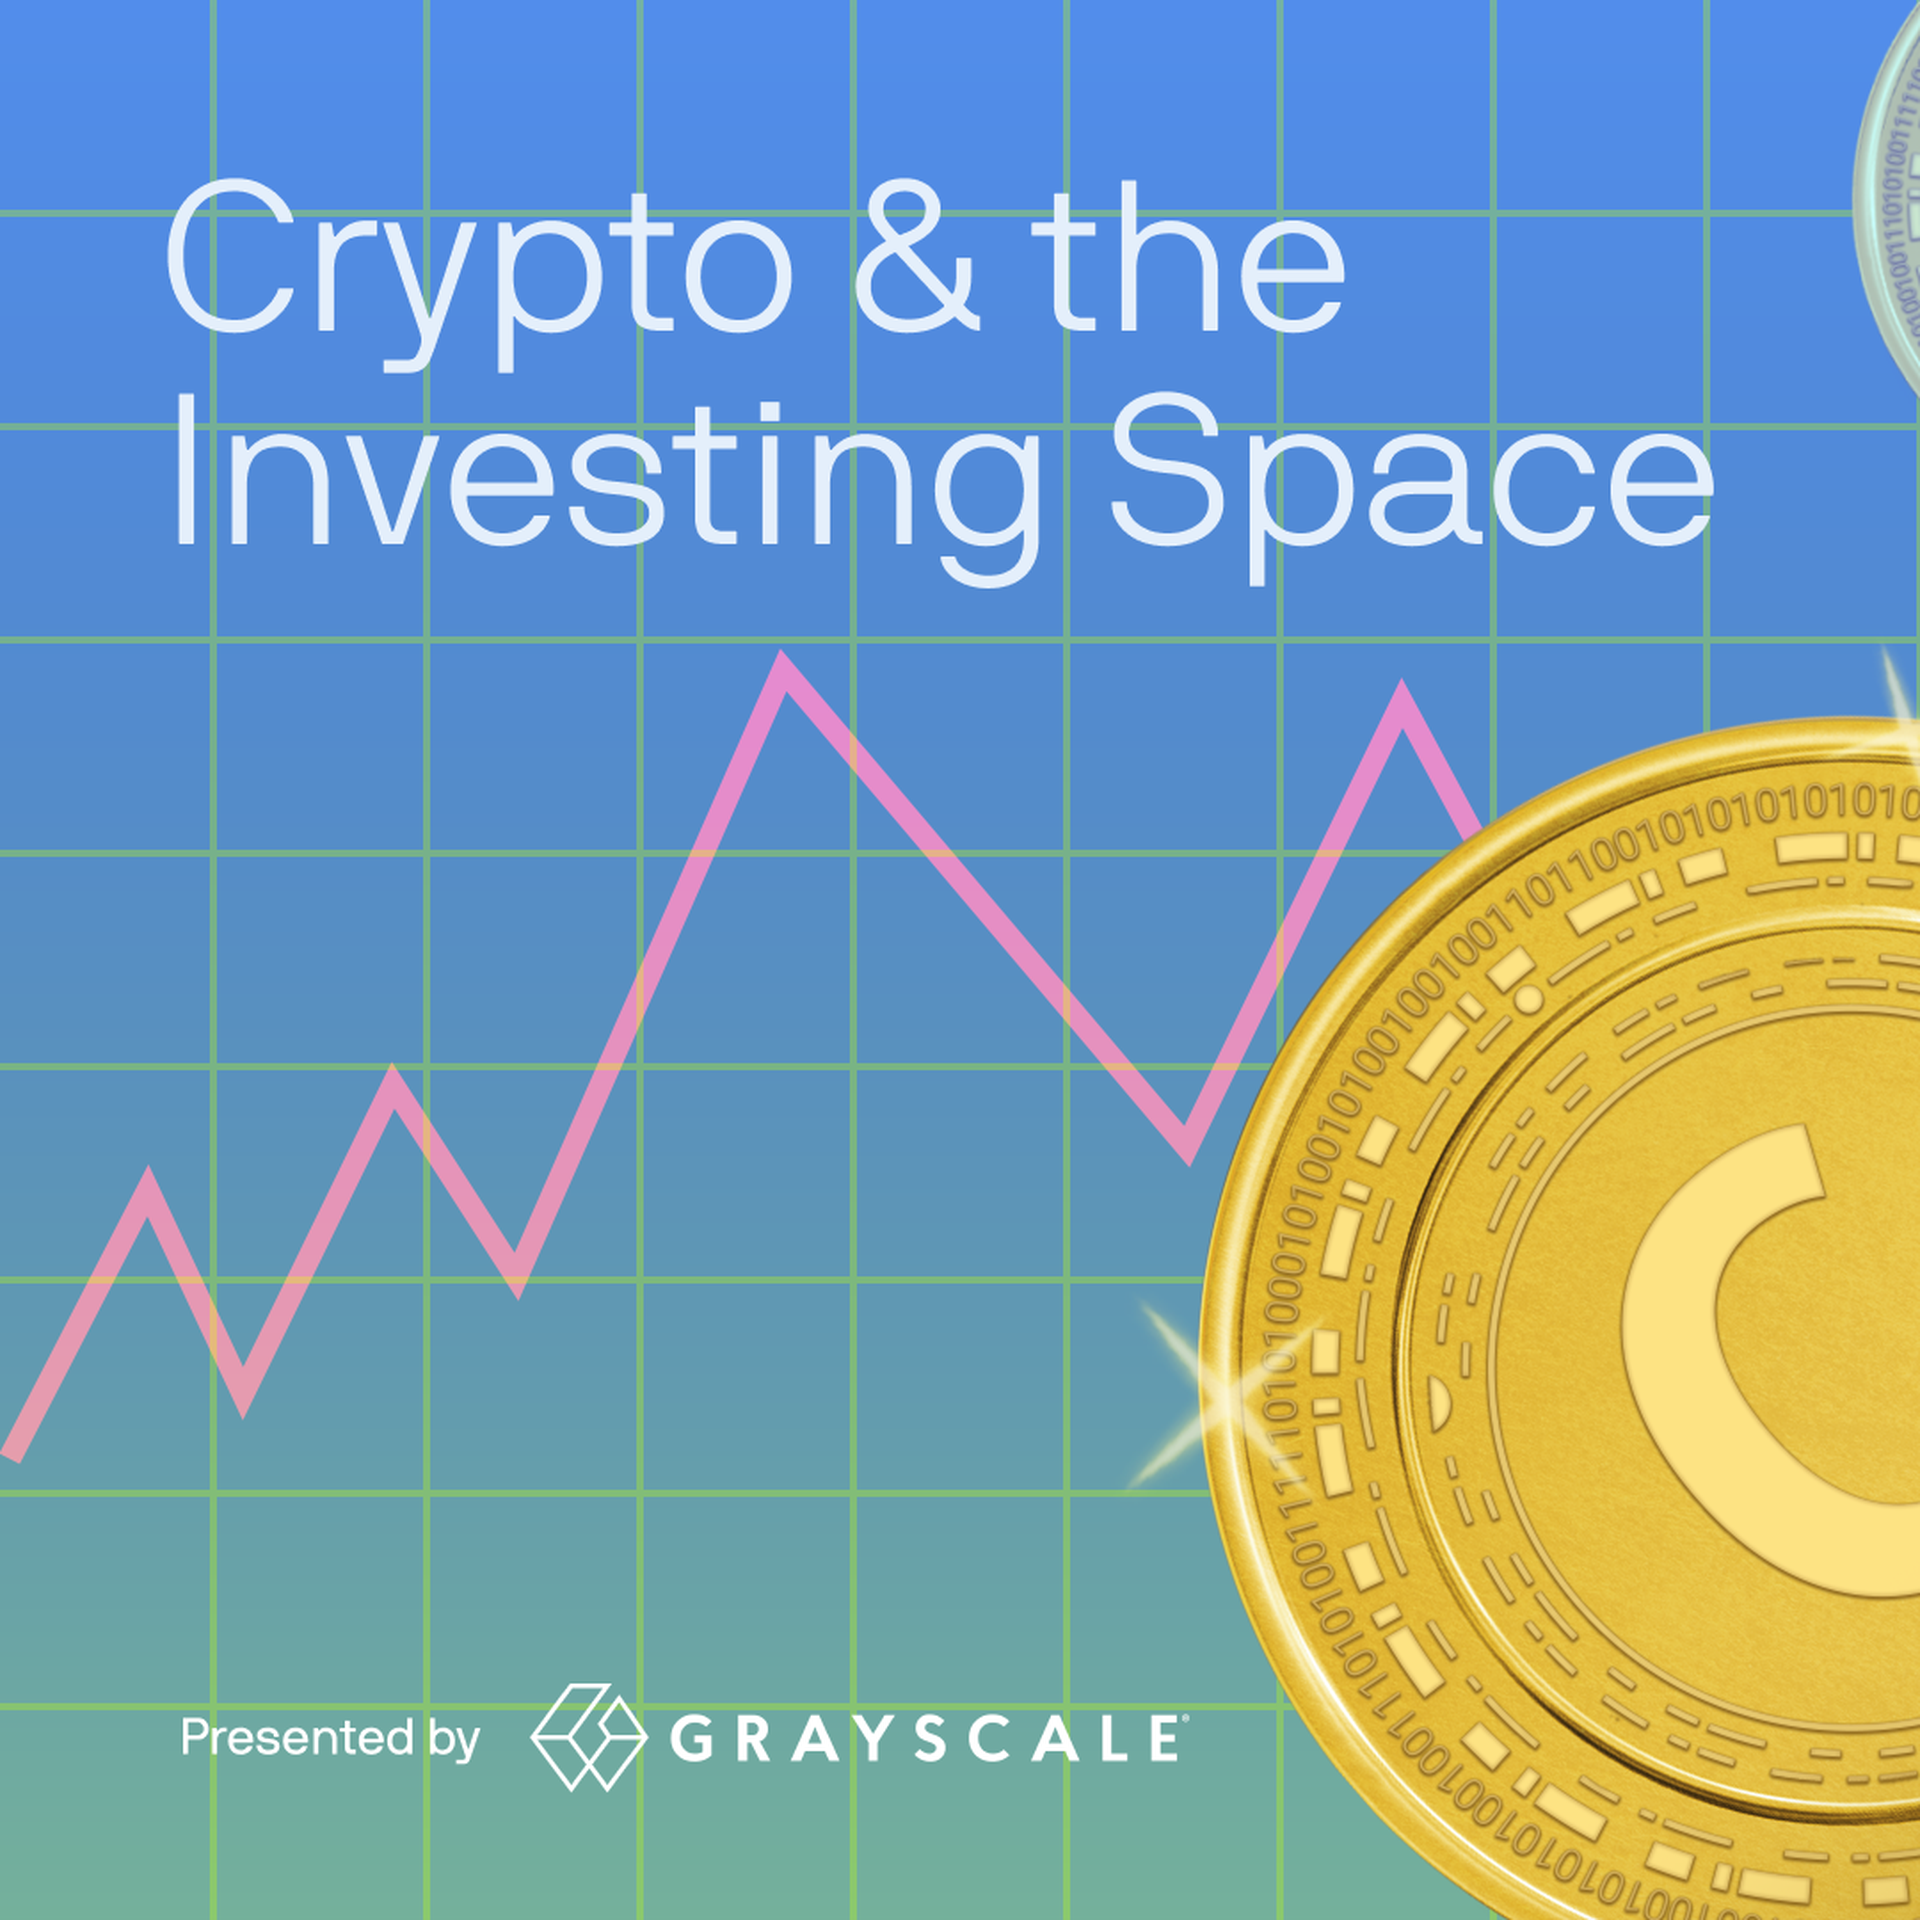 Event promo image for Crypto & the Investing Space